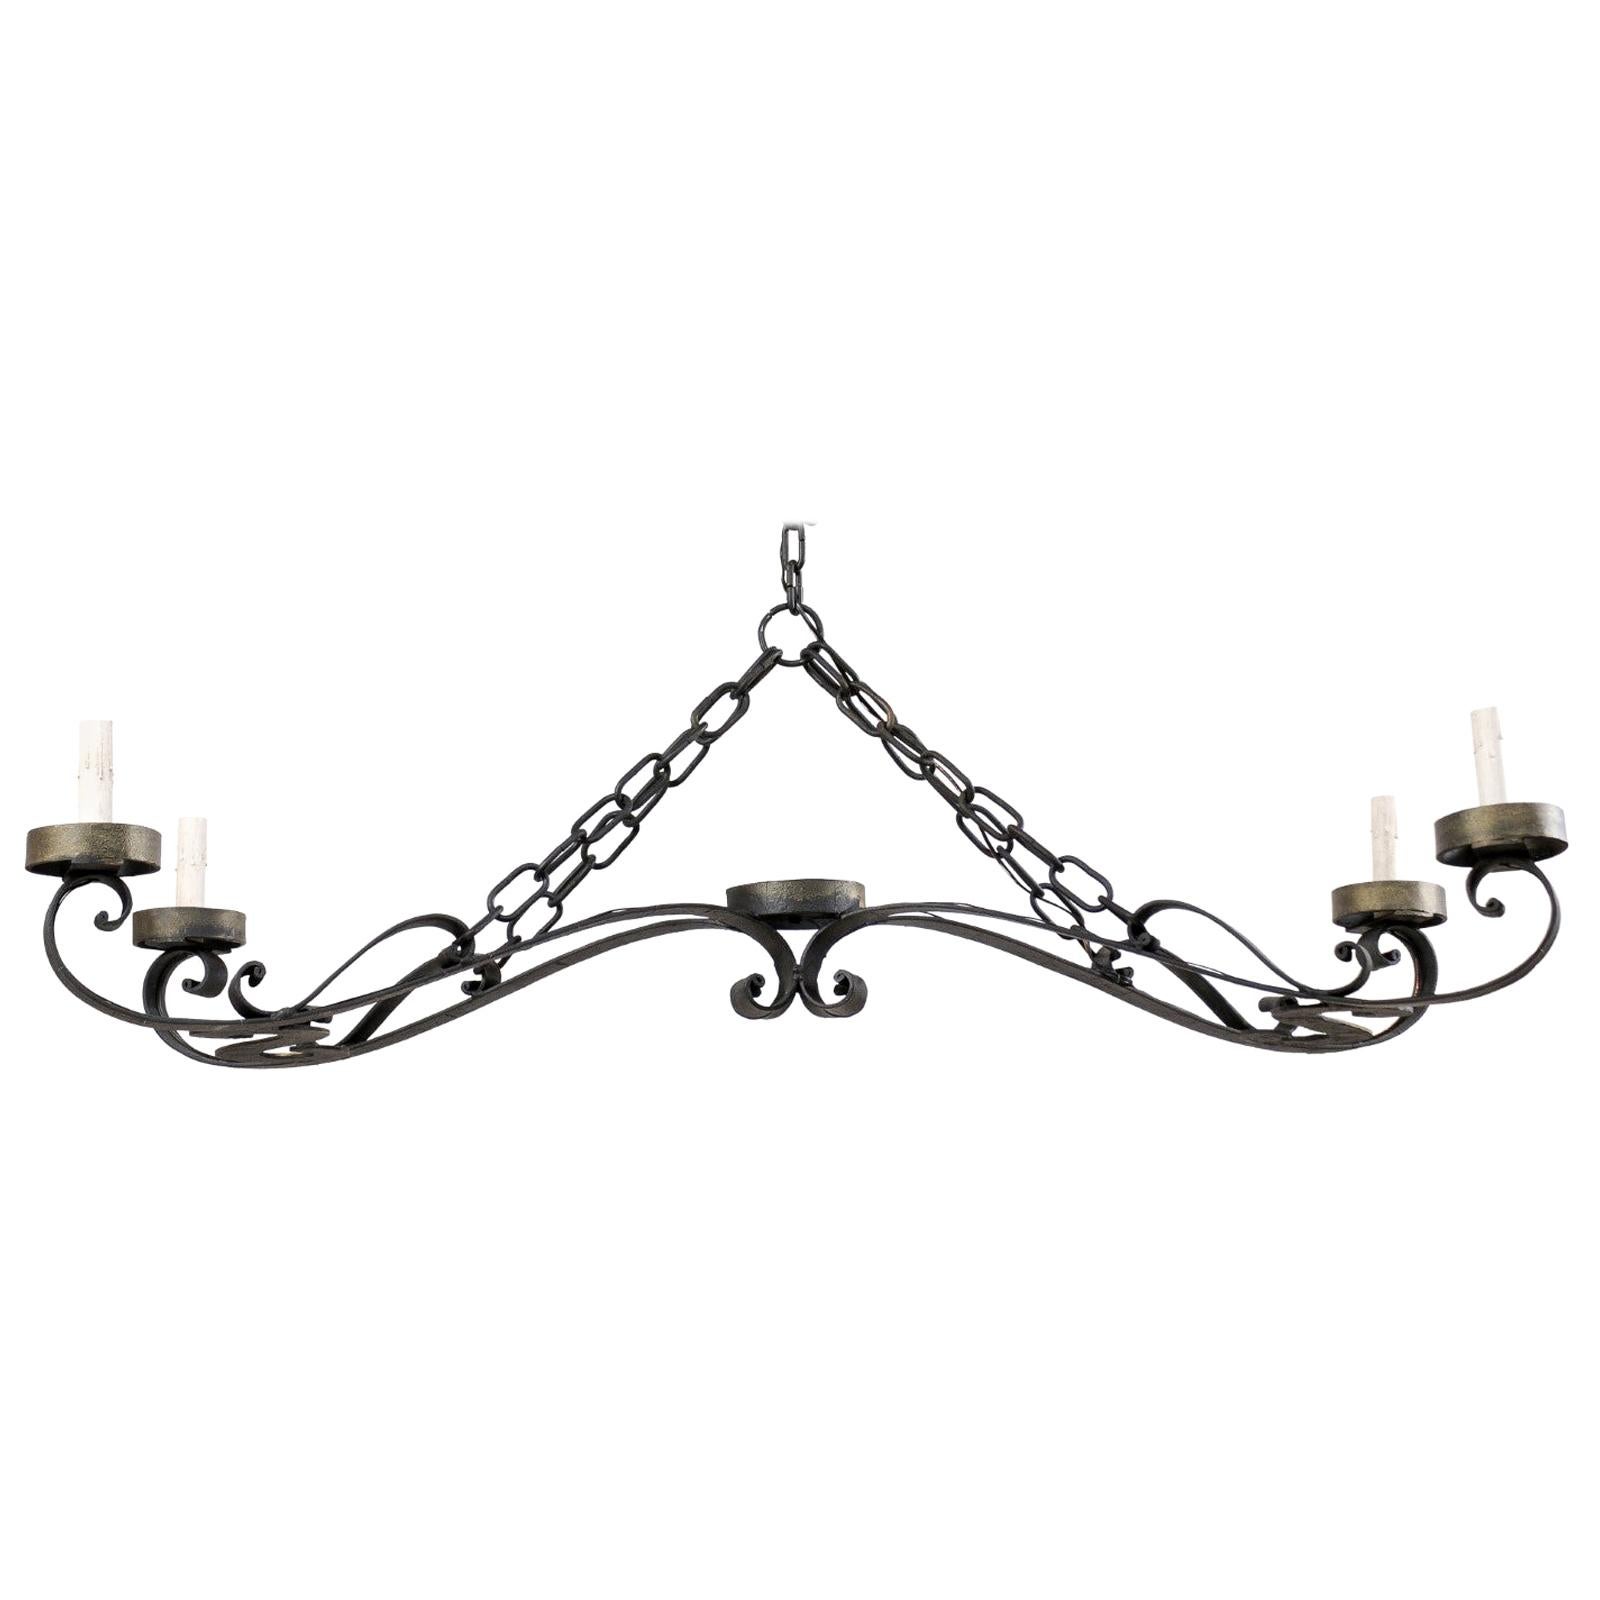 An Elegant French Wrought Iron Chandelier a Great Large Size of 5+ Ft in Length!